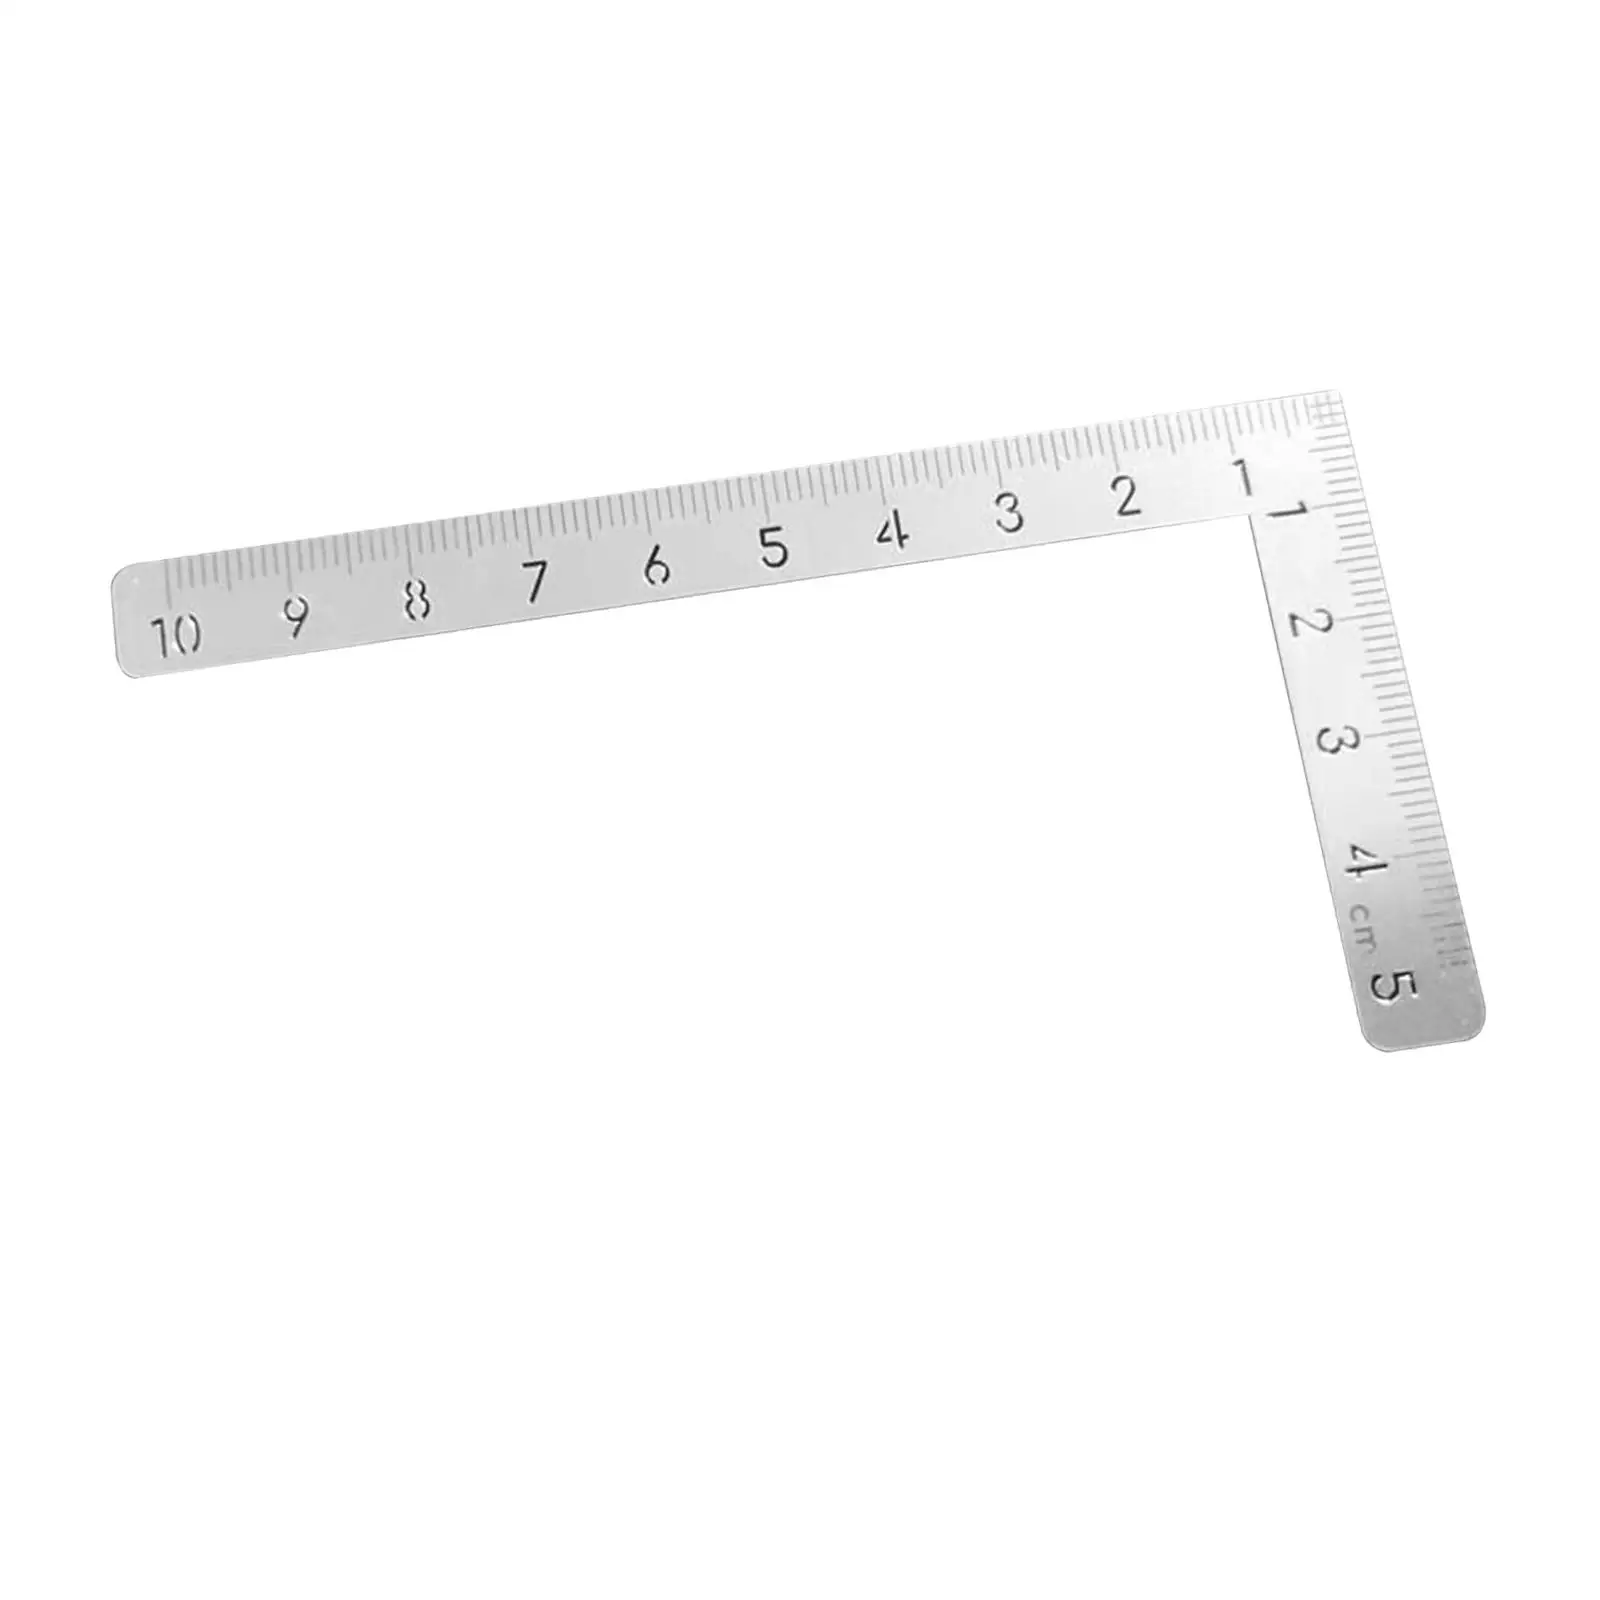 Leather Craft Ruler Stainless Steel Precise Angle Framing Square 90 Degree for Model Making Tools Drafting Tools Hobby Tailor